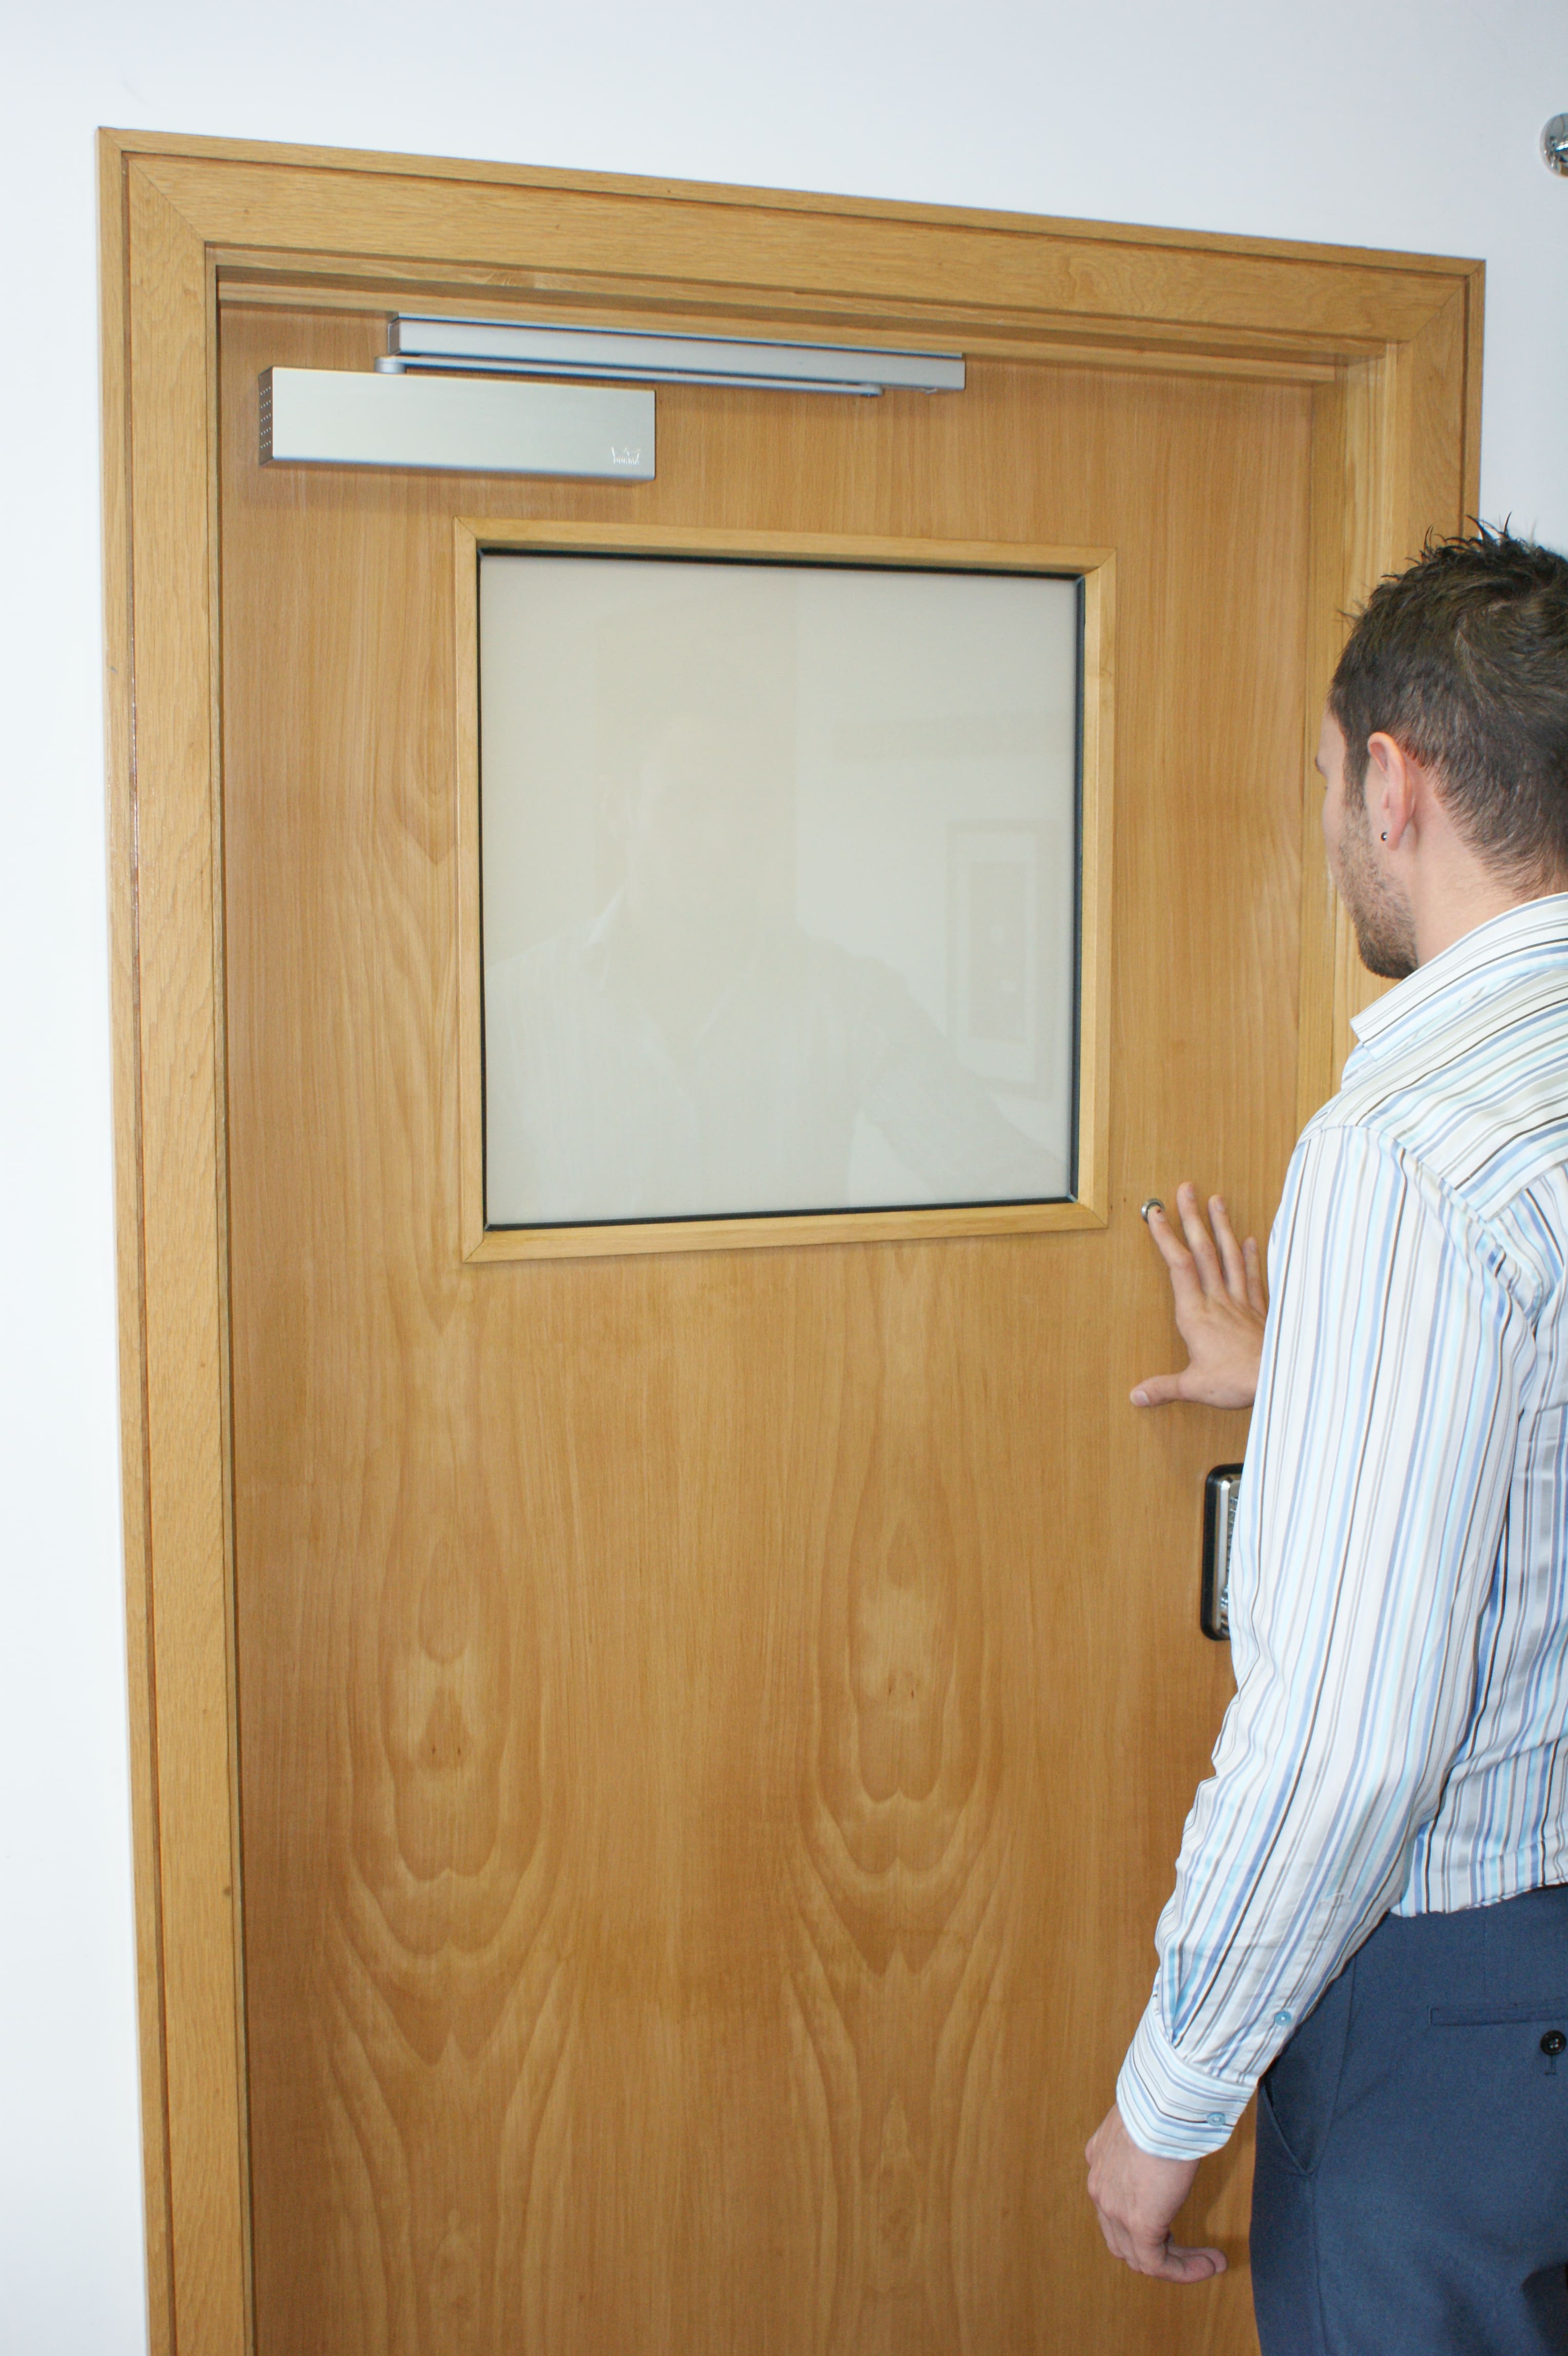 Square Smart Door Vision Panel switched to off in meeting room